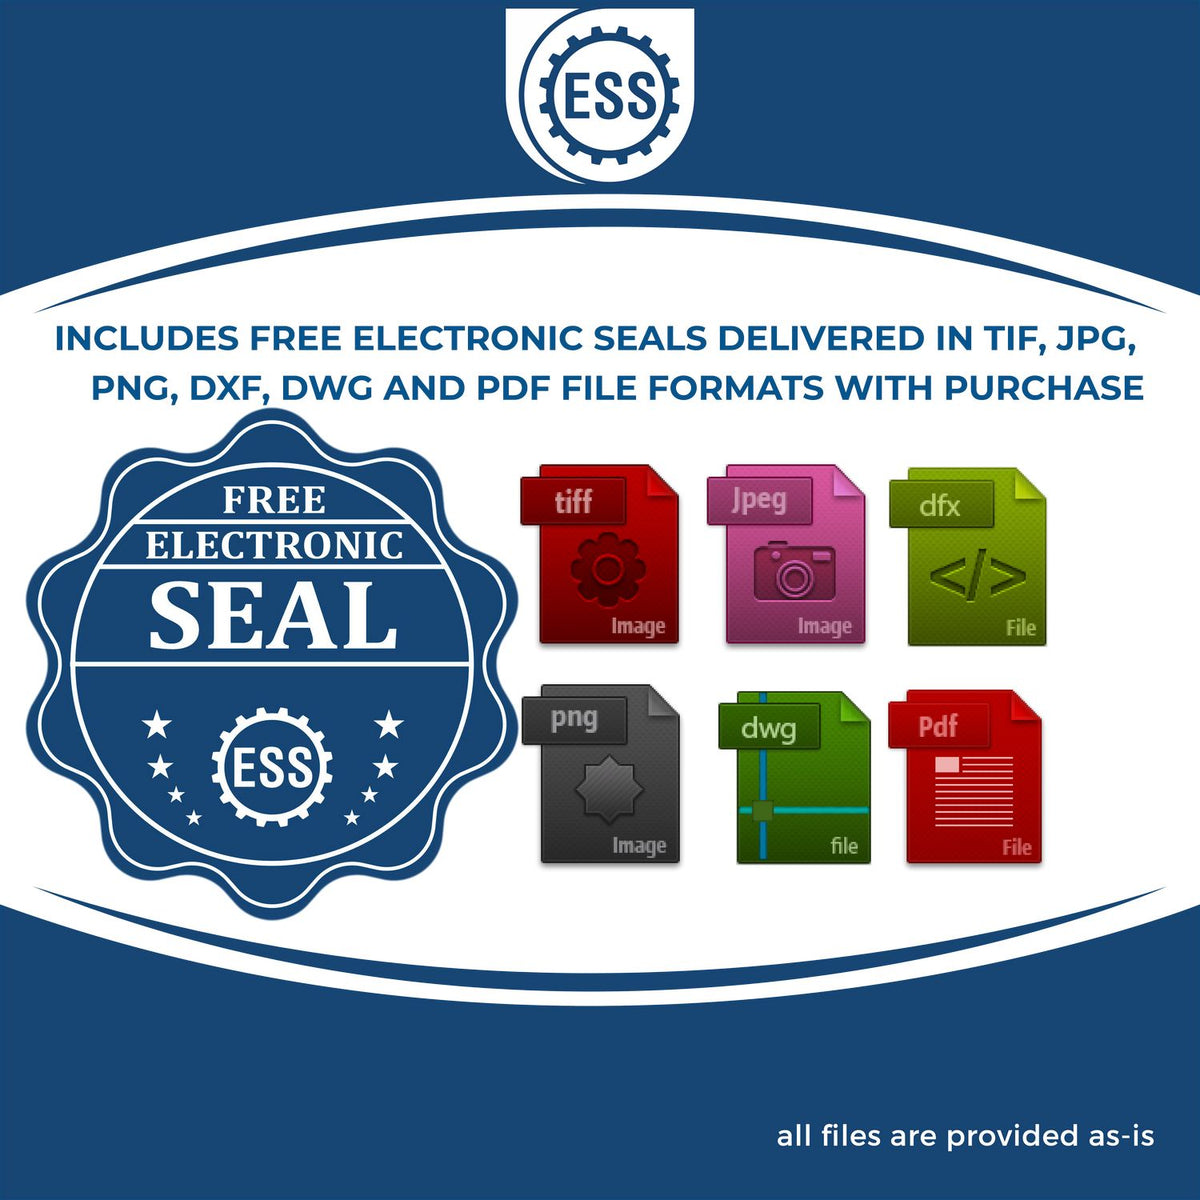 An infographic for the free electronic seal for the Self-Inking Kentucky Landscape Architect Stamp illustrating the different file type icons such as DXF, DWG, TIF, JPG and PNG.